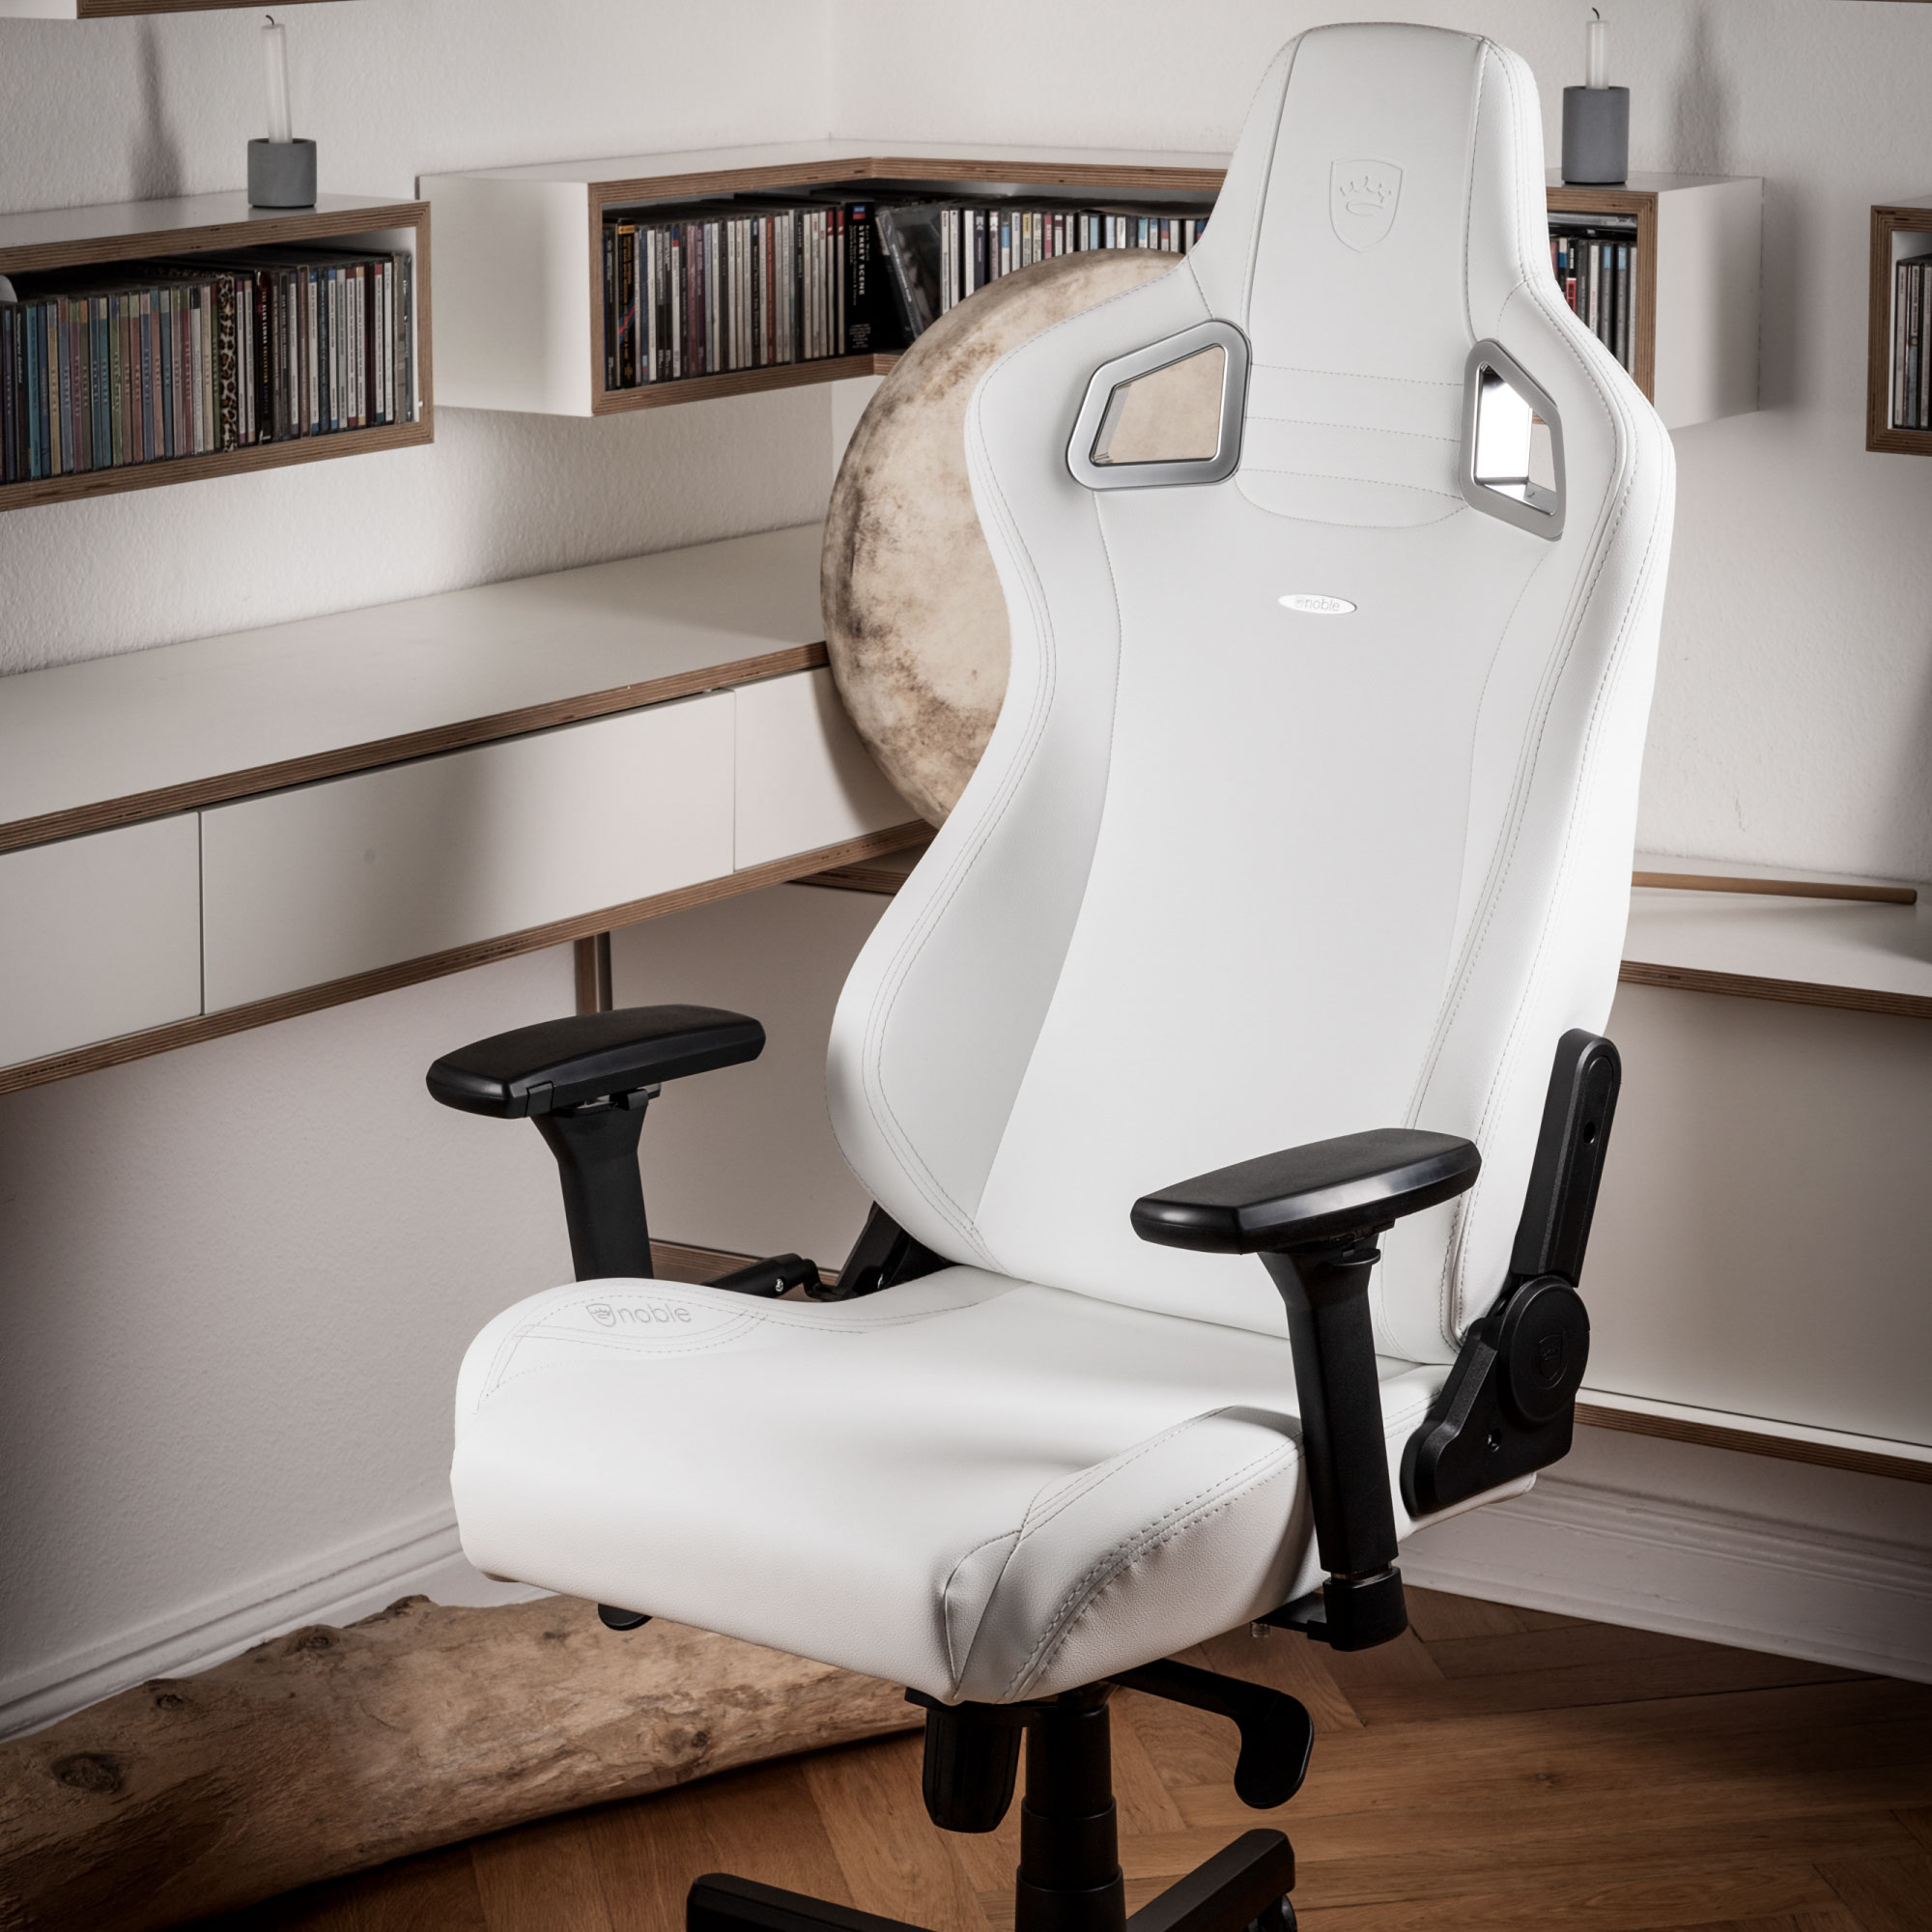 noblechairs EPIC - WHITE EDITION - ゲーミングチェア - 株式会社 